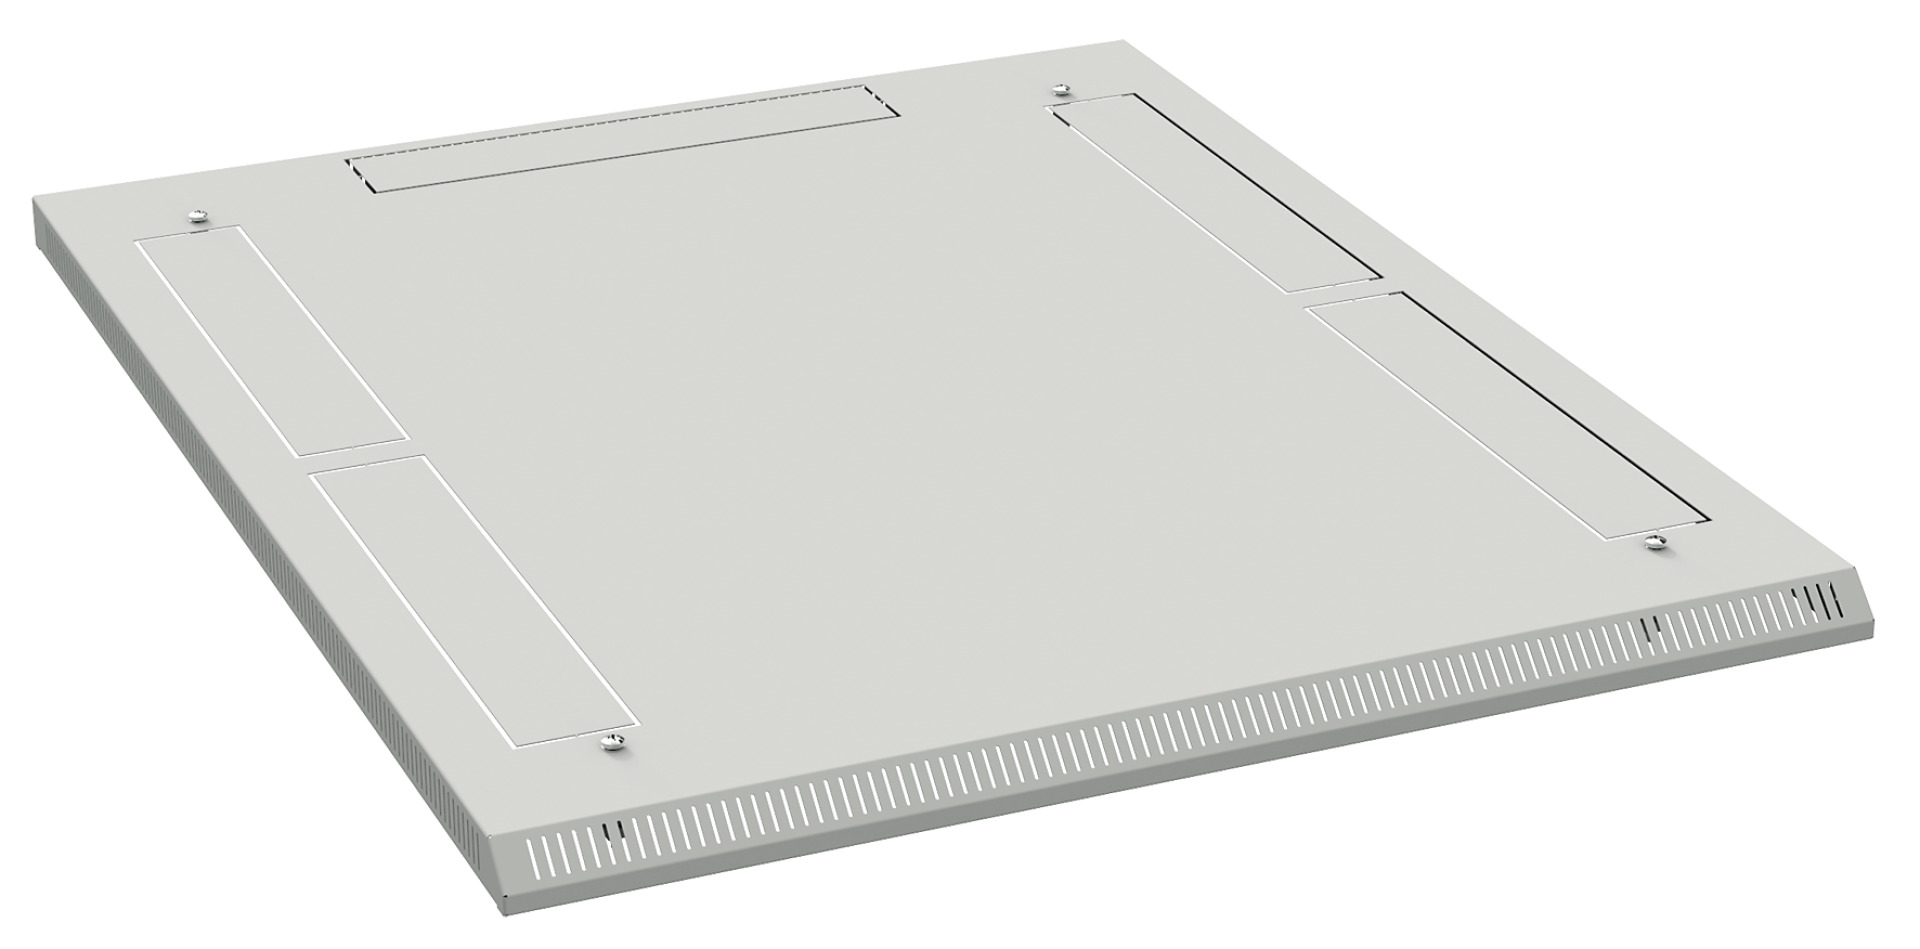 Additional Roof H=40 mm, 800x1200 mm, RAL9005, for Cabinet Series PRO